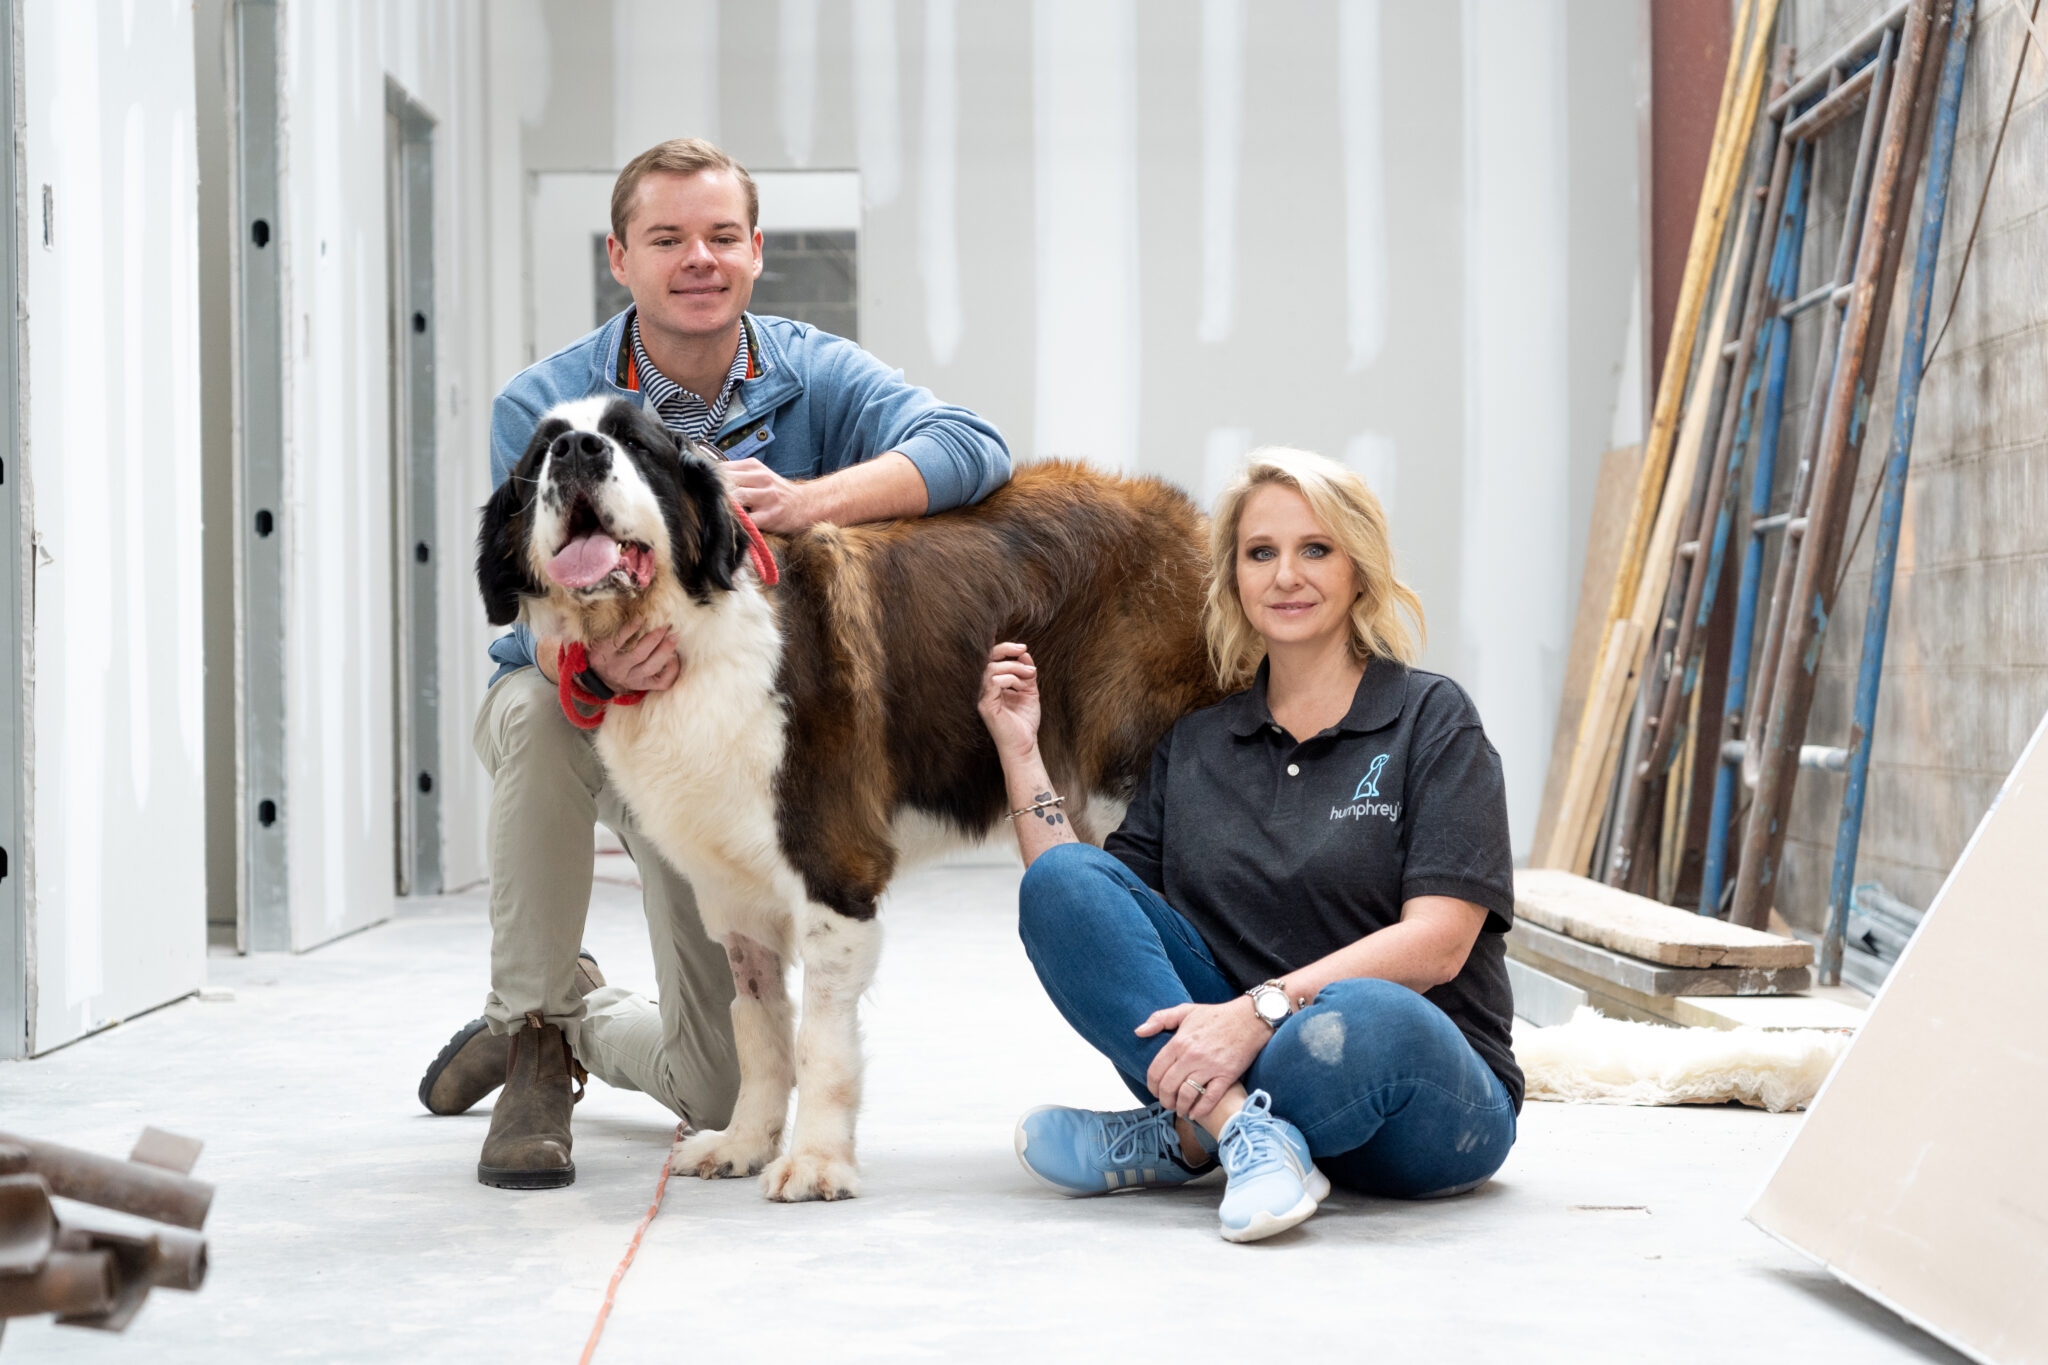 COMING SOON: Luxury Birmingham dog resort that will make your pet feel at home